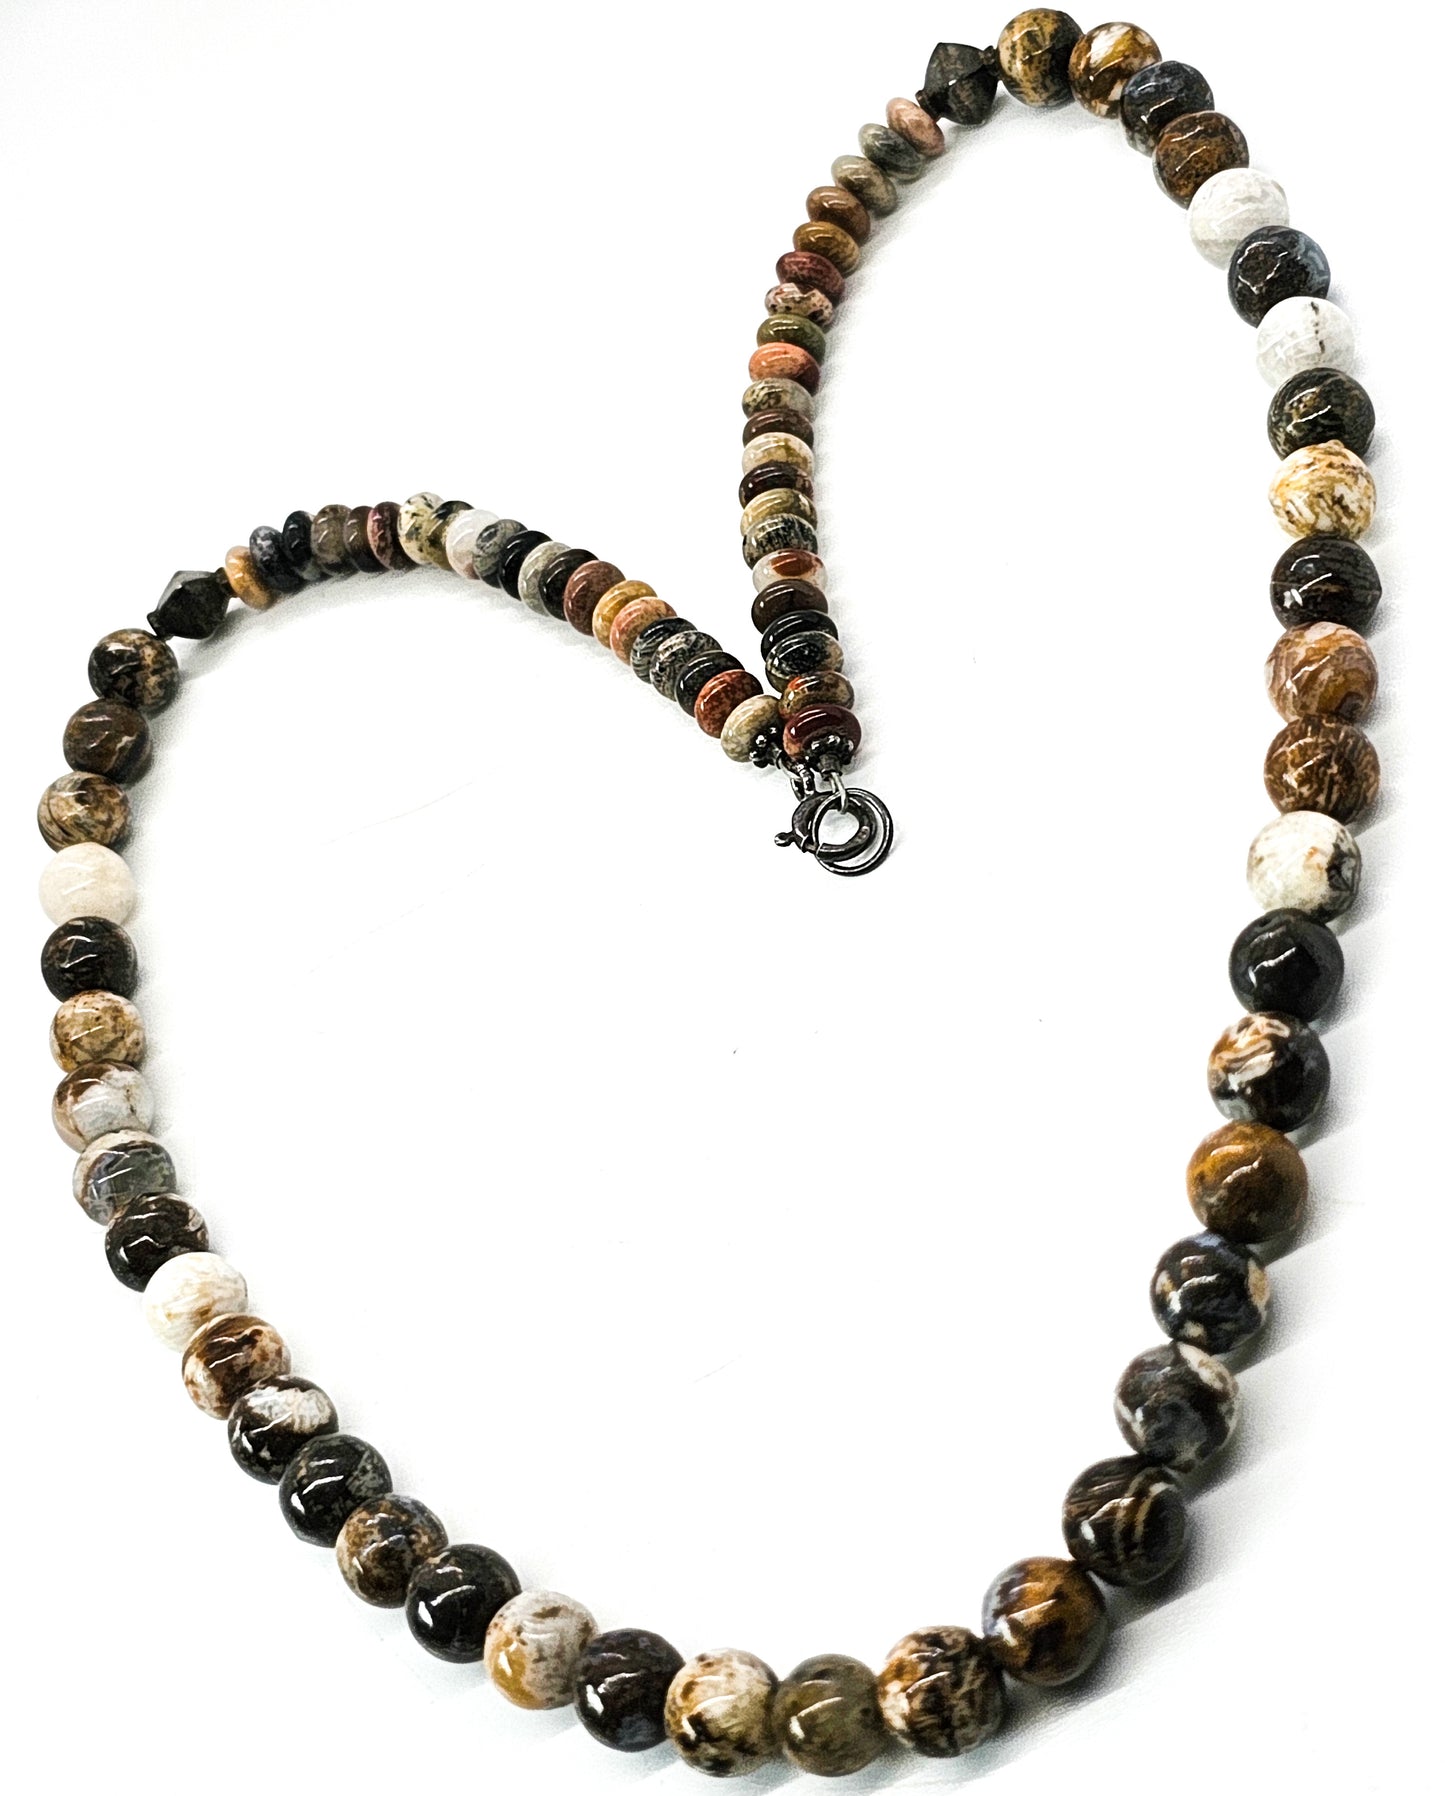 Picasso jasper and pyrite beaded sterling silver 20 inch necklace